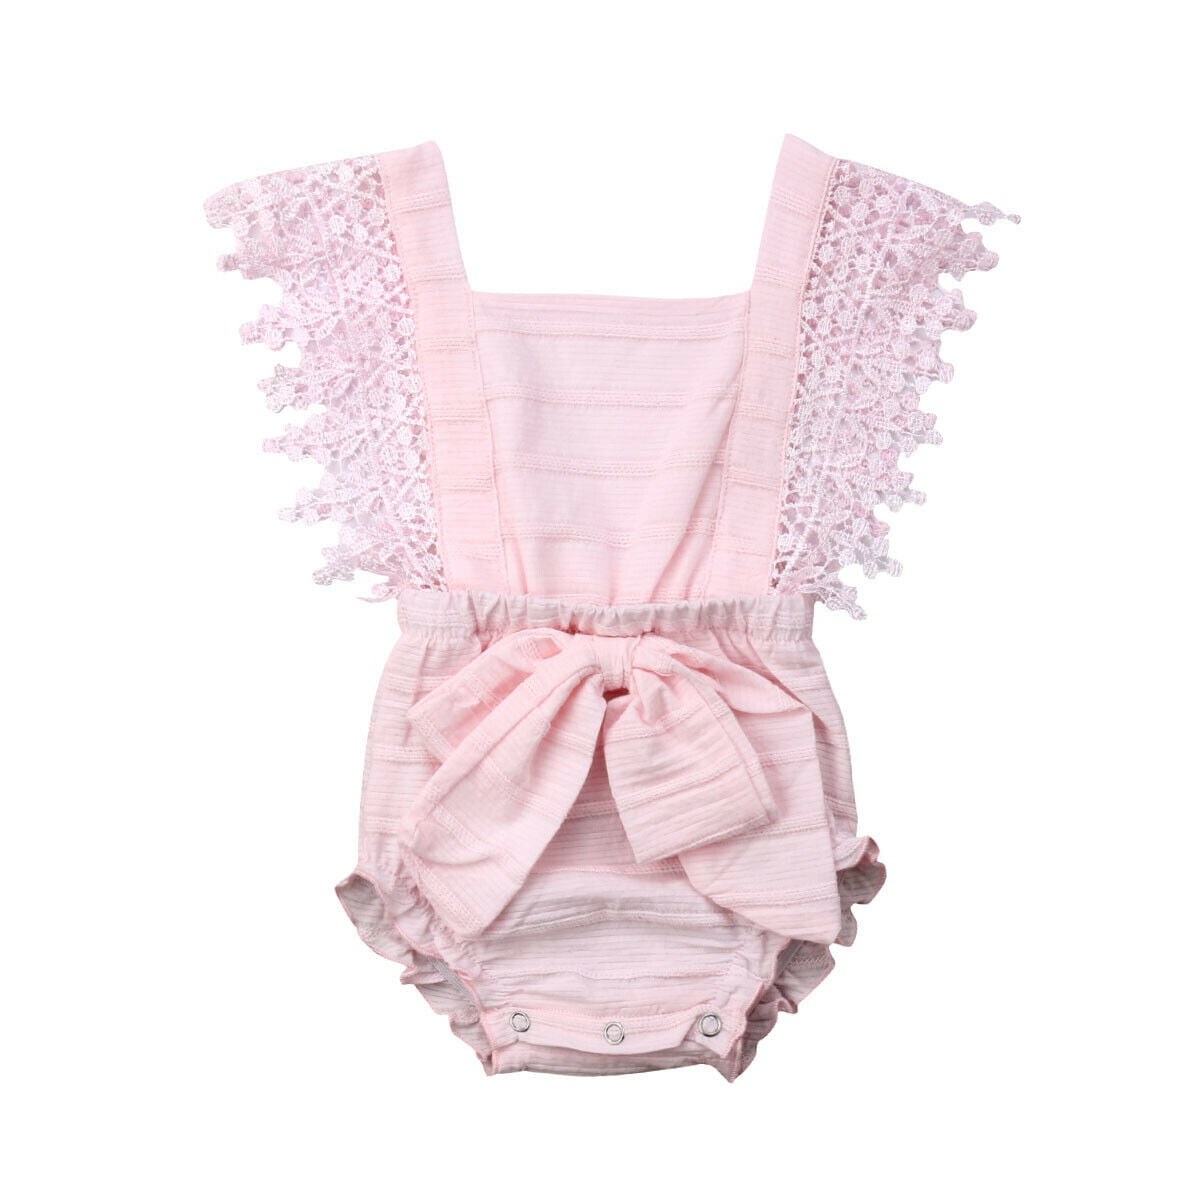 Newborn Infant Baby Girl Kid Summer Clothes Bow Romper Bodysuit Sunsuit Outfits 